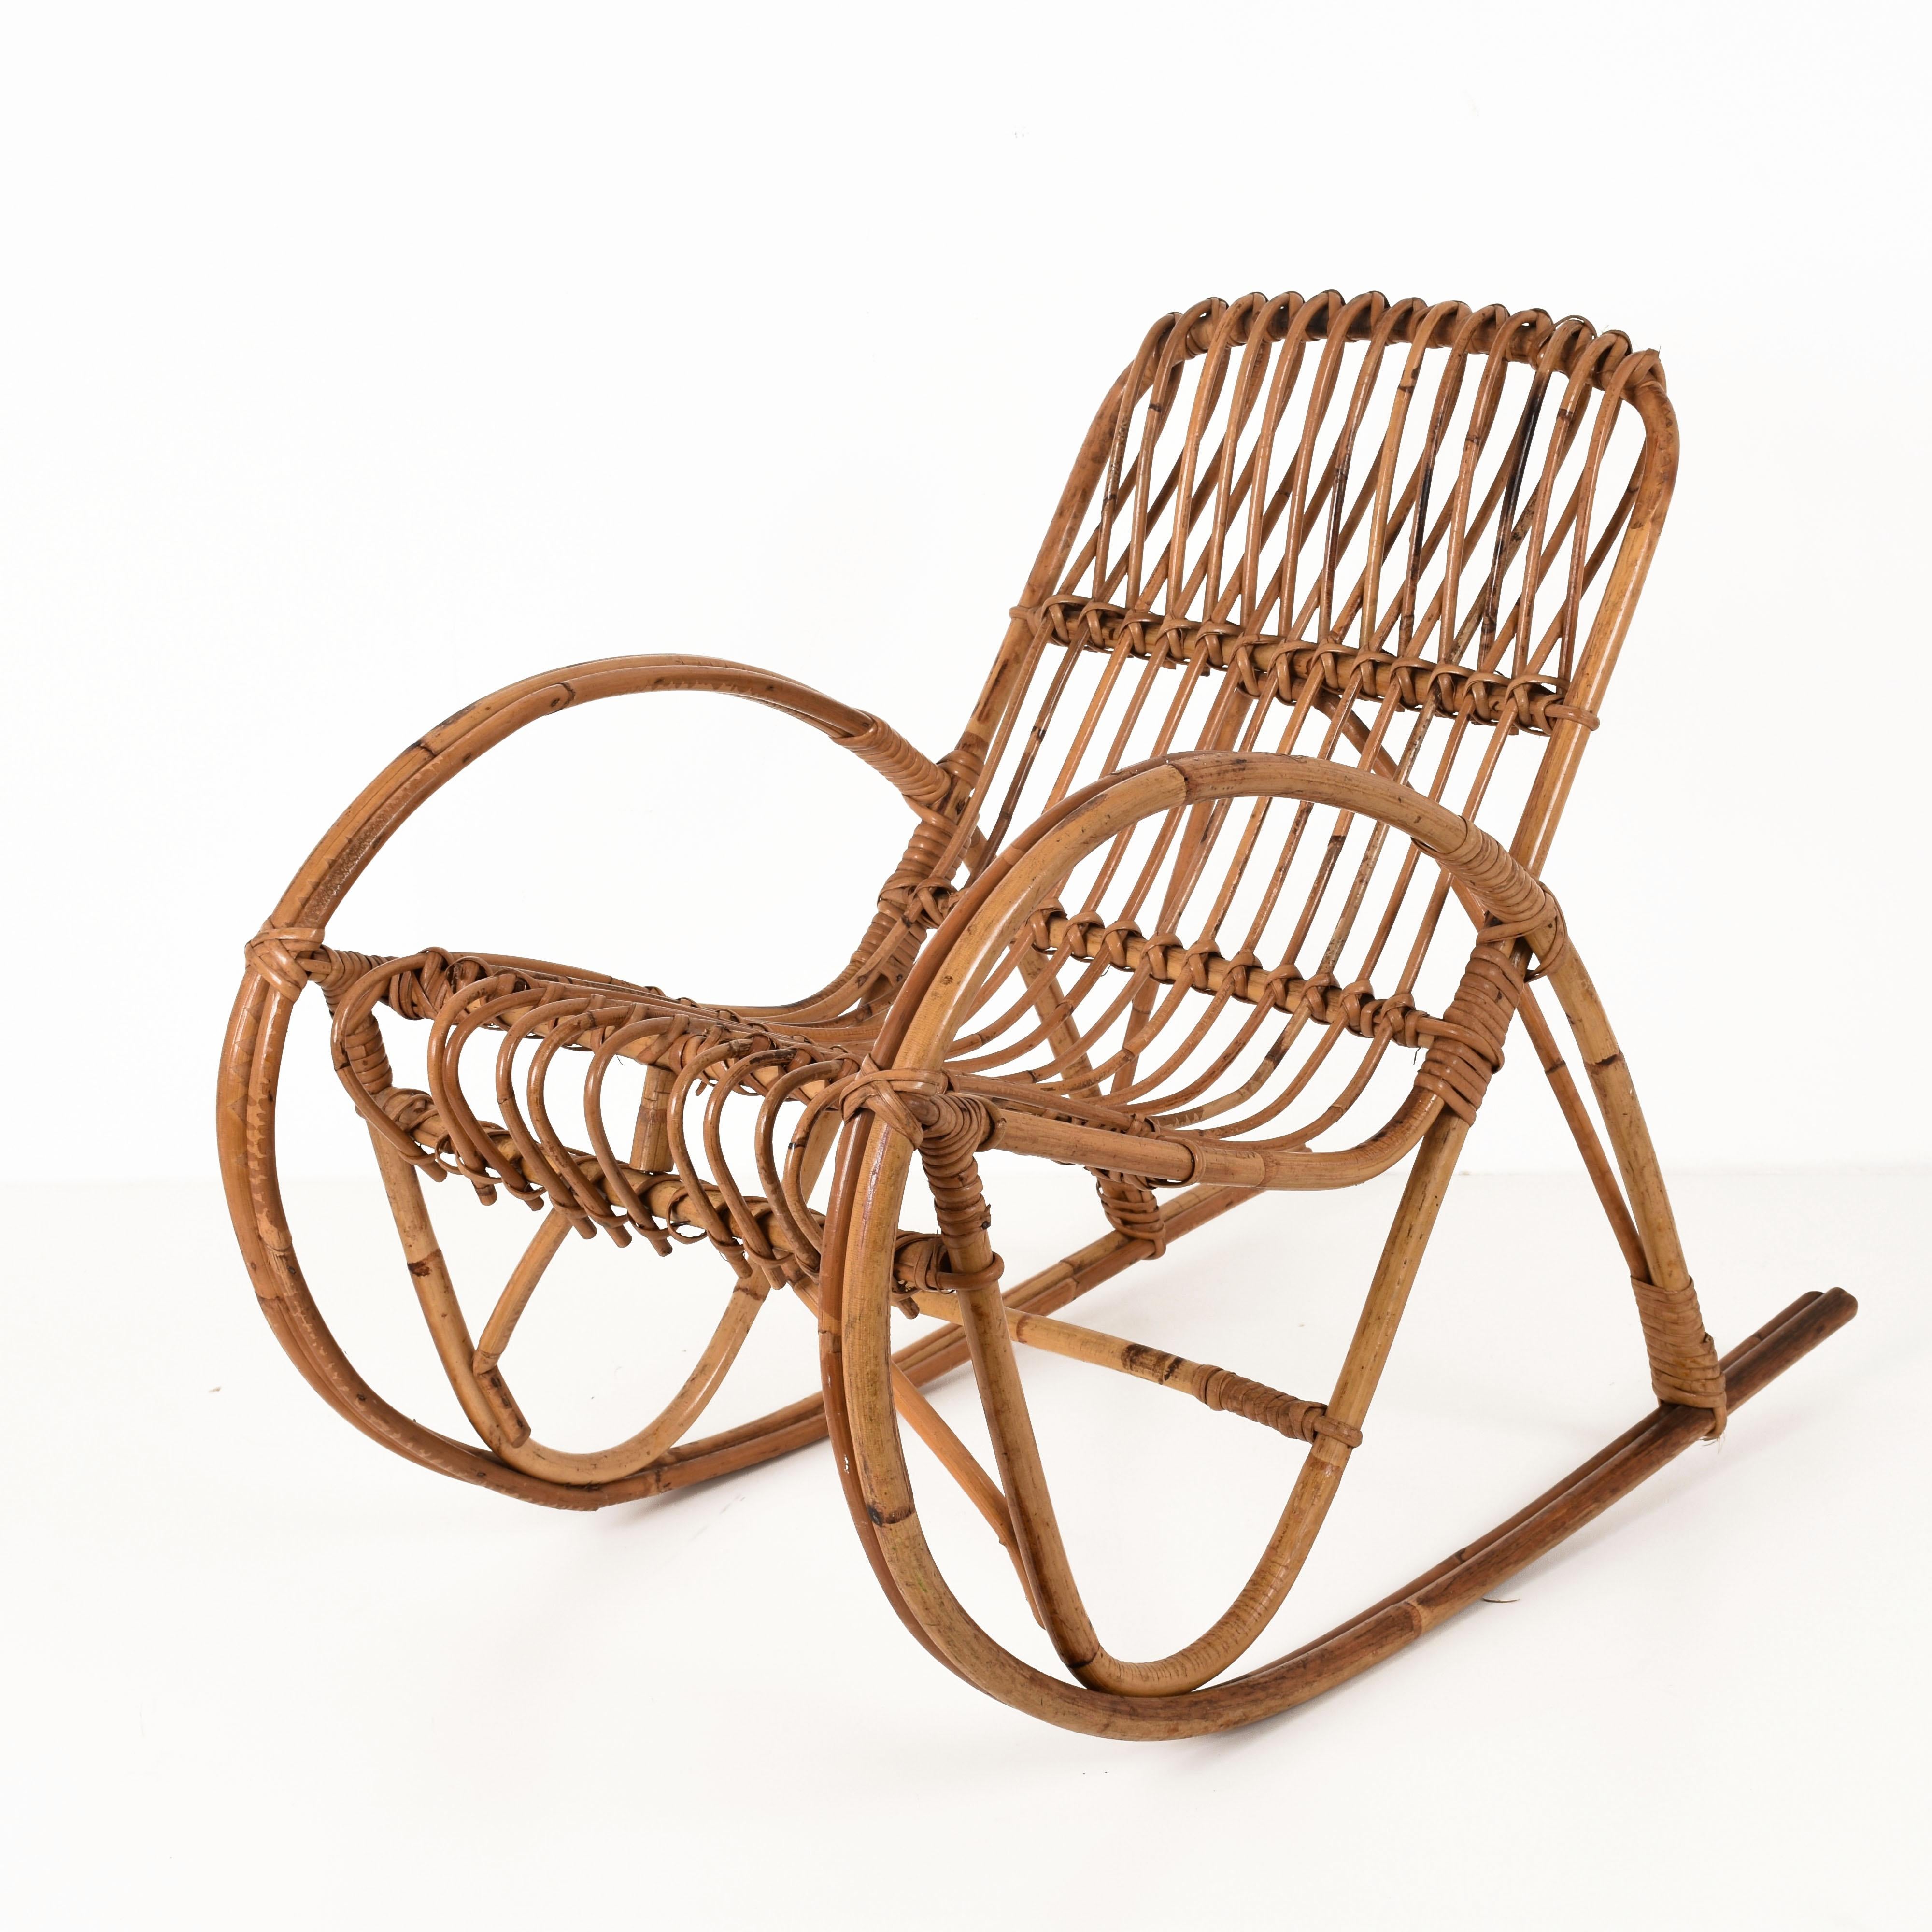 Midcentury Riviera Rattan and Bamboo Italian Rocking Chair for Children, 1950s For Sale 2